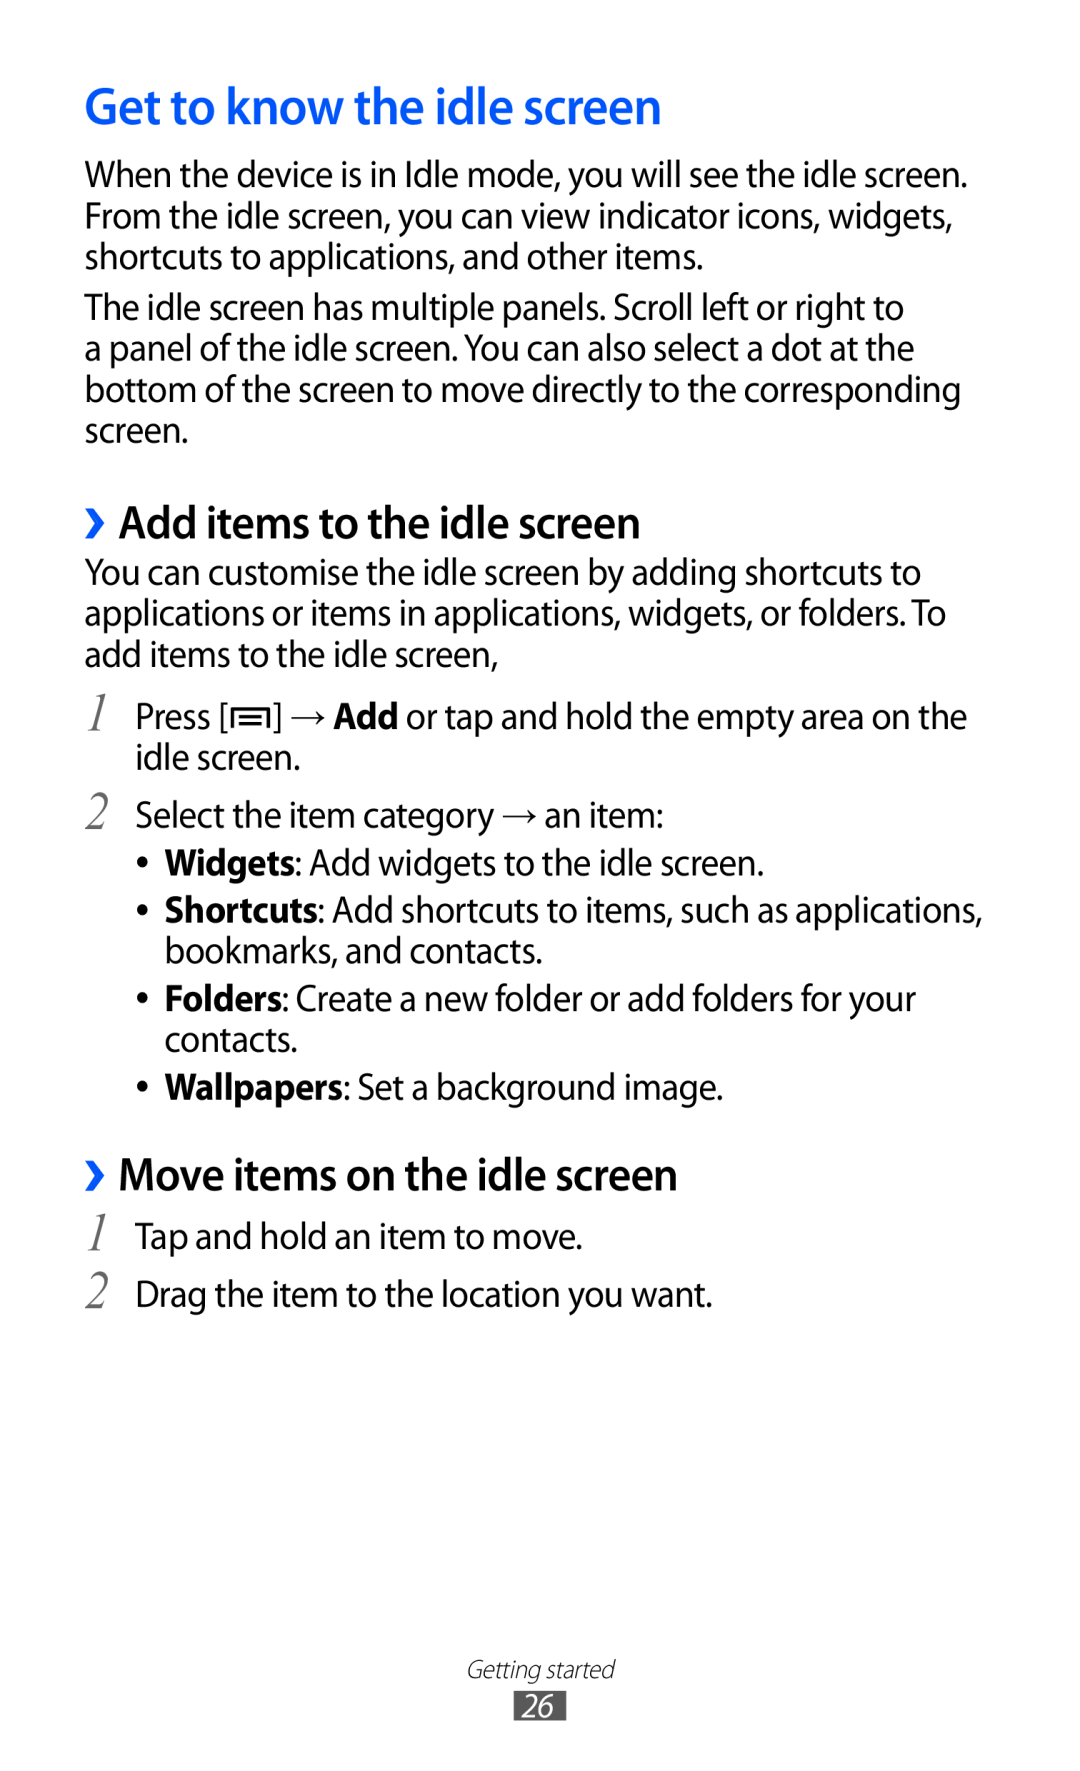 Samsung GT-I9070RWAKSA manual Get to know the idle screen, ››Add items to the idle screen, ››Move items on the idle screen 